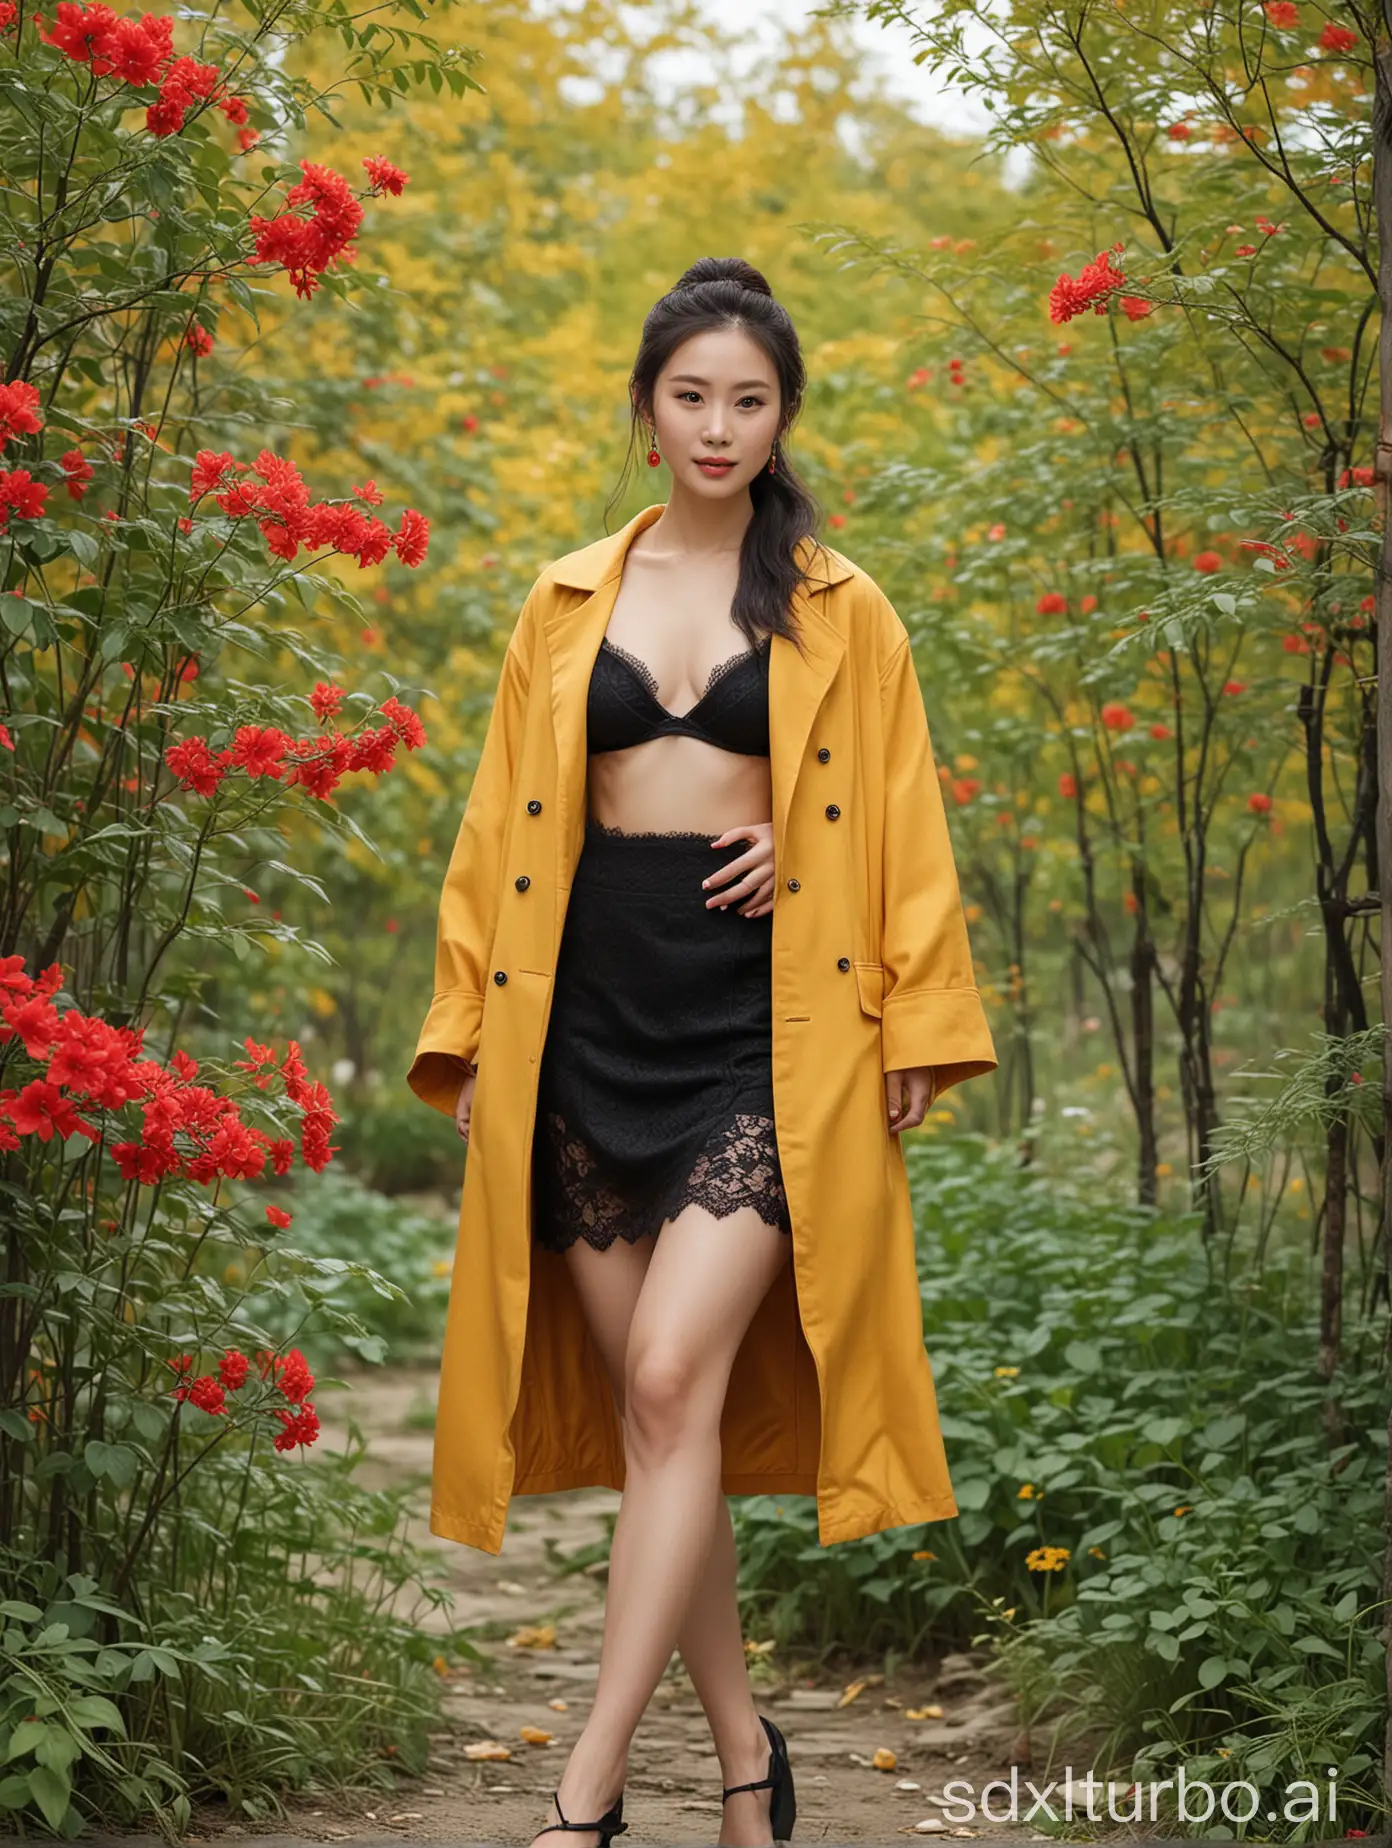 32-year-old Chinese beauty, 173 centimeters tall, weighing 70 kilograms. Oval face shape, delicate and beautiful features, well-proportioned figure, fair skin, ample buttocks, medium-length hair, diagonally tied ponytail, red gemstone earrings, bright yellow thin dress coat, black lace underwear, overall, barefoot wearing black high heels with red soles, sedan, 54-year-old boyfriend. Building, green trees, red flowers.